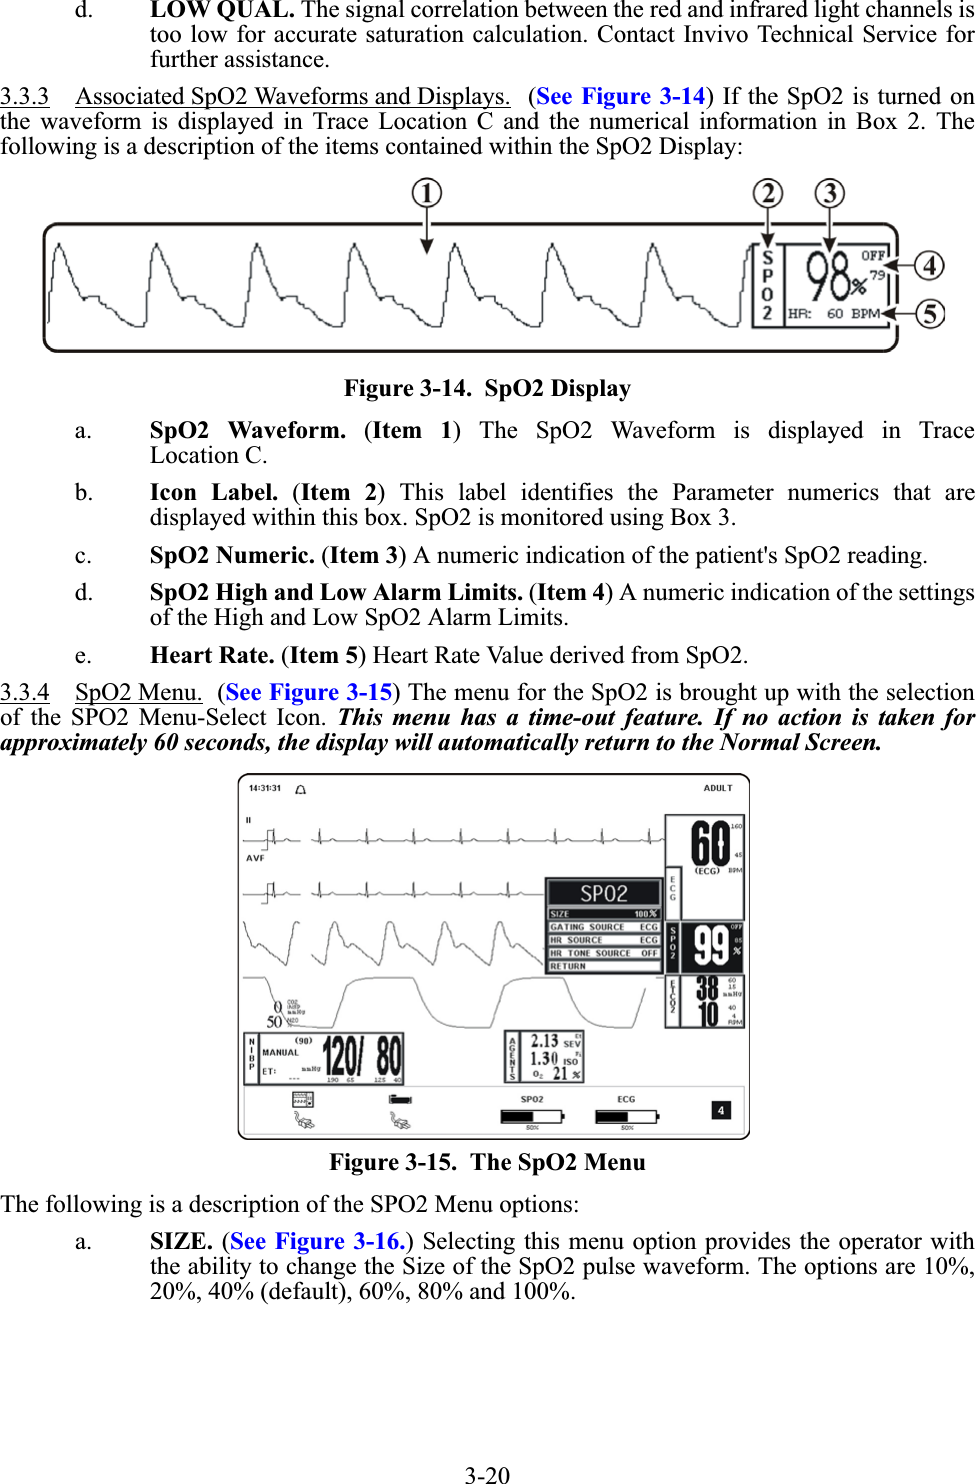 3-20d. LOW QUAL. The signal correlation between the red and infrared light channels istoo low for accurate saturation calculation. Contact Invivo Technical Service forfurther assistance.3.3.3 Associated SpO2 Waveforms and Displays.  (See Figure 3-14) If the SpO2 is turned onthe waveform is displayed in Trace Location C and the numerical information in Box 2. Thefollowing is a description of the items contained within the SpO2 Display:Figure 3-14.  SpO2 Displaya. SpO2 Waveform. (Item 1) The SpO2 Waveform is displayed in TraceLocation C.b. Icon Label. (Item 2) This label identifies the Parameter numerics that aredisplayed within this box. SpO2 is monitored using Box 3.c. SpO2 Numeric. (Item 3) A numeric indication of the patient&apos;s SpO2 reading.d. SpO2 High and Low Alarm Limits. (Item 4) A numeric indication of the settingsof the High and Low SpO2 Alarm Limits.e. Heart Rate. (Item 5) Heart Rate Value derived from SpO2.3.3.4 SpO2 Menu.  (See Figure 3-15) The menu for the SpO2 is brought up with the selectionof the SPO2 Menu-Select Icon. This menu has a time-out feature. If no action is taken forapproximately 60 seconds, the display will automatically return to the Normal Screen.Figure 3-15.  The SpO2 MenuThe following is a description of the SPO2 Menu options:a. SIZE. (See Figure 3-16.) Selecting this menu option provides the operator withthe ability to change the Size of the SpO2 pulse waveform. The options are 10%,20%, 40% (default), 60%, 80% and 100%.